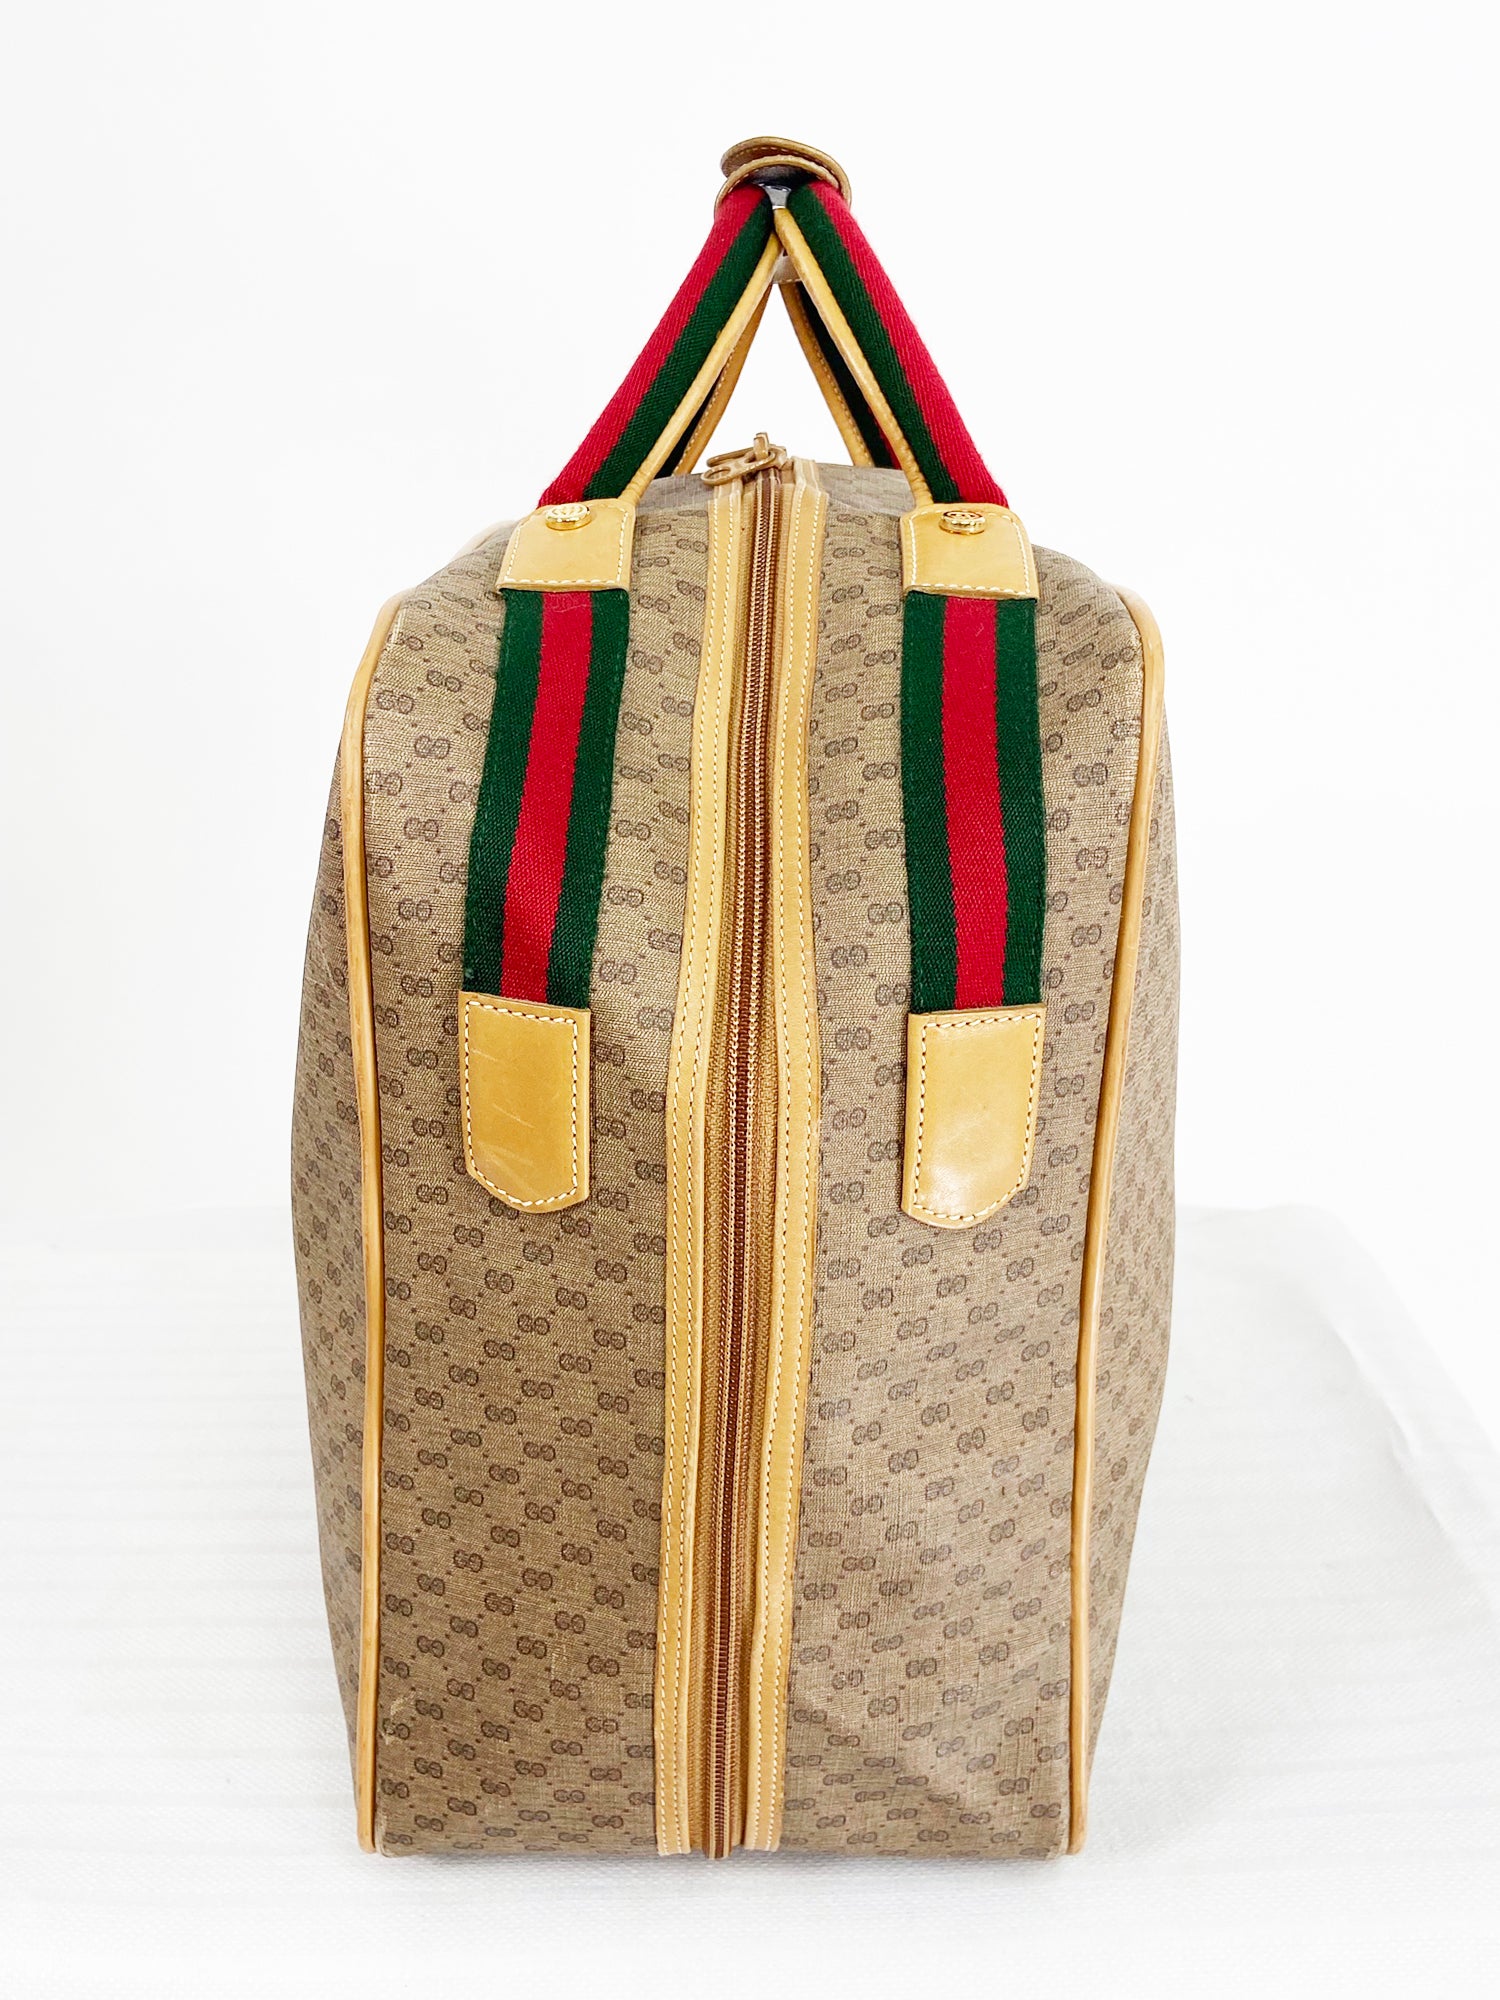 Gucci 1980s Bags, Handbags & Cases for sale